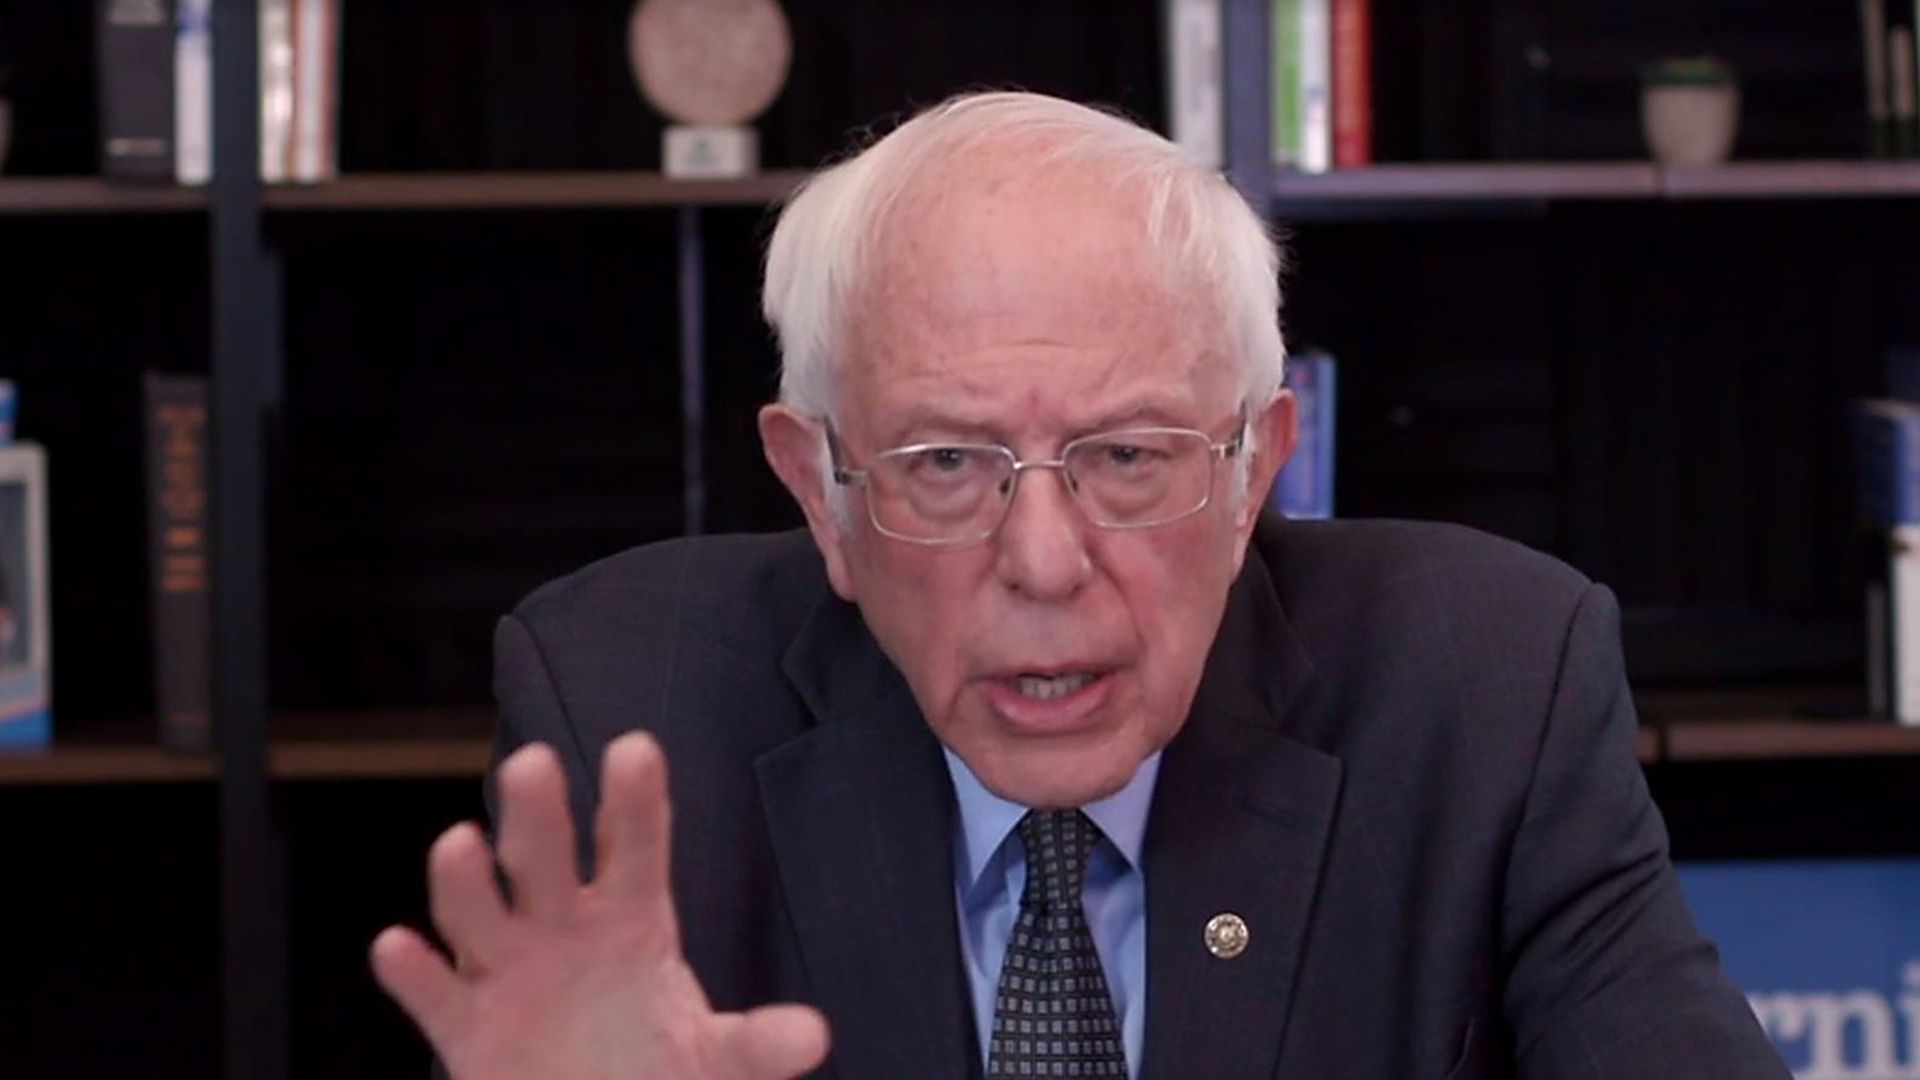 Democratic presidential candidate Sen. Bernie Sanders (I-VT) talks about his plan to deal with the coronavirus pandemic